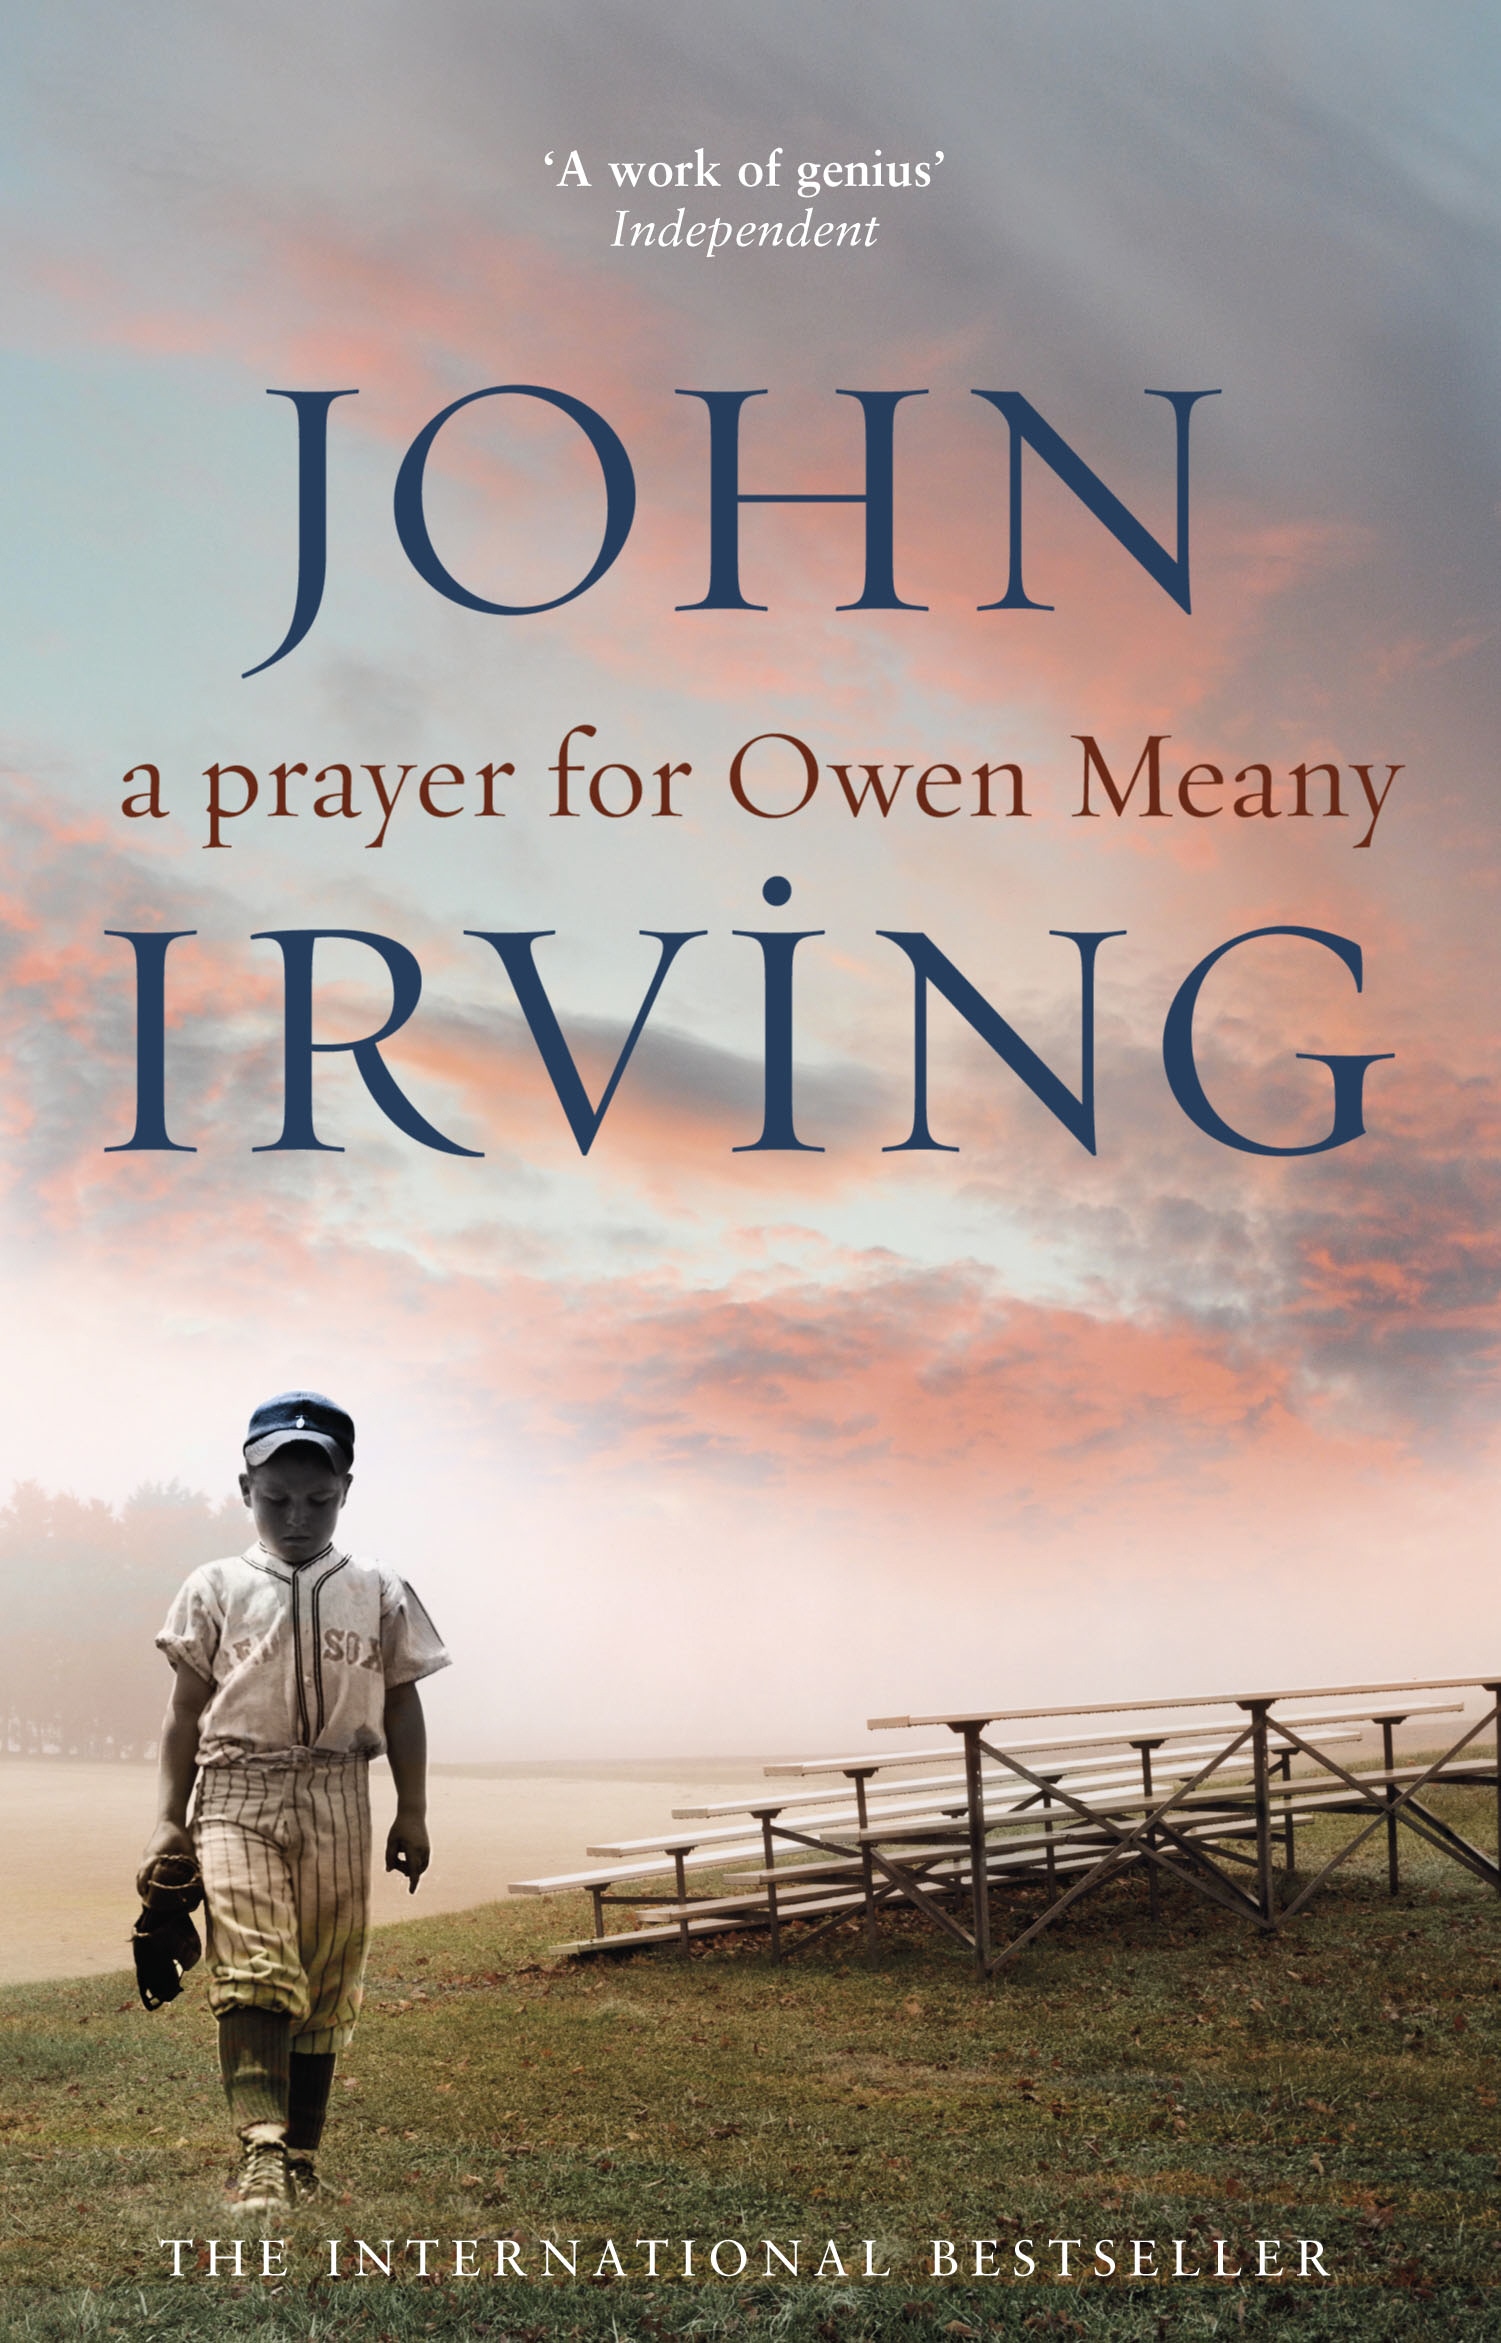 Book “A Prayer For Owen Meany” by John Irving — May 1, 1990